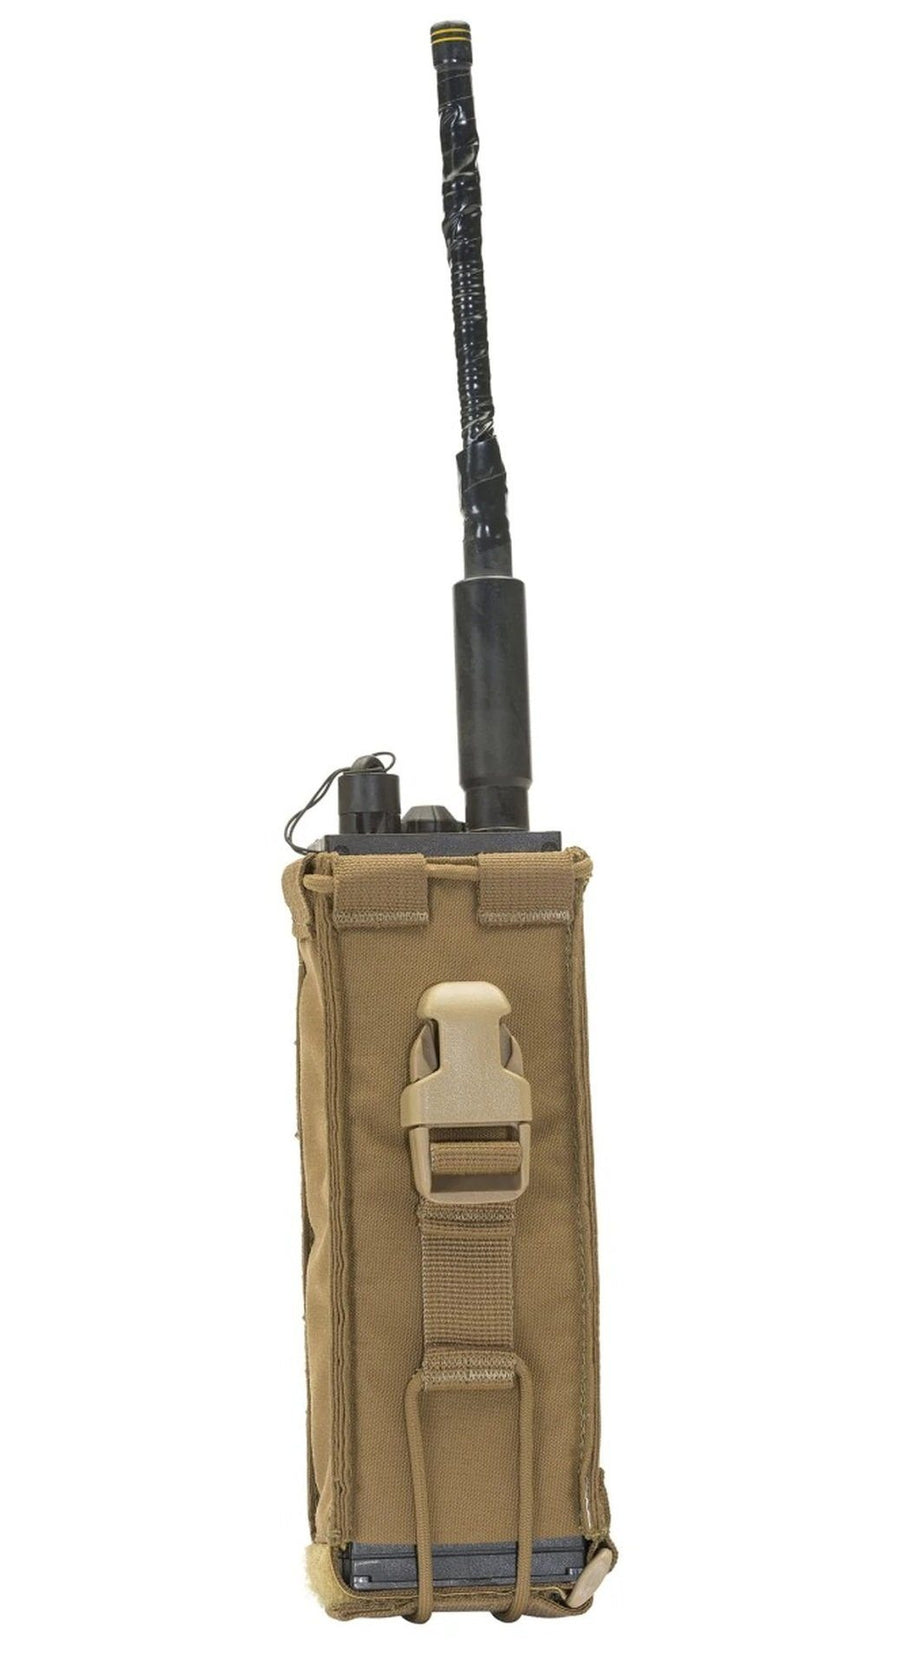 Gear - Pouches - Radio - T3 Gear Adjustable MBITR Radio MOLLE Pouch